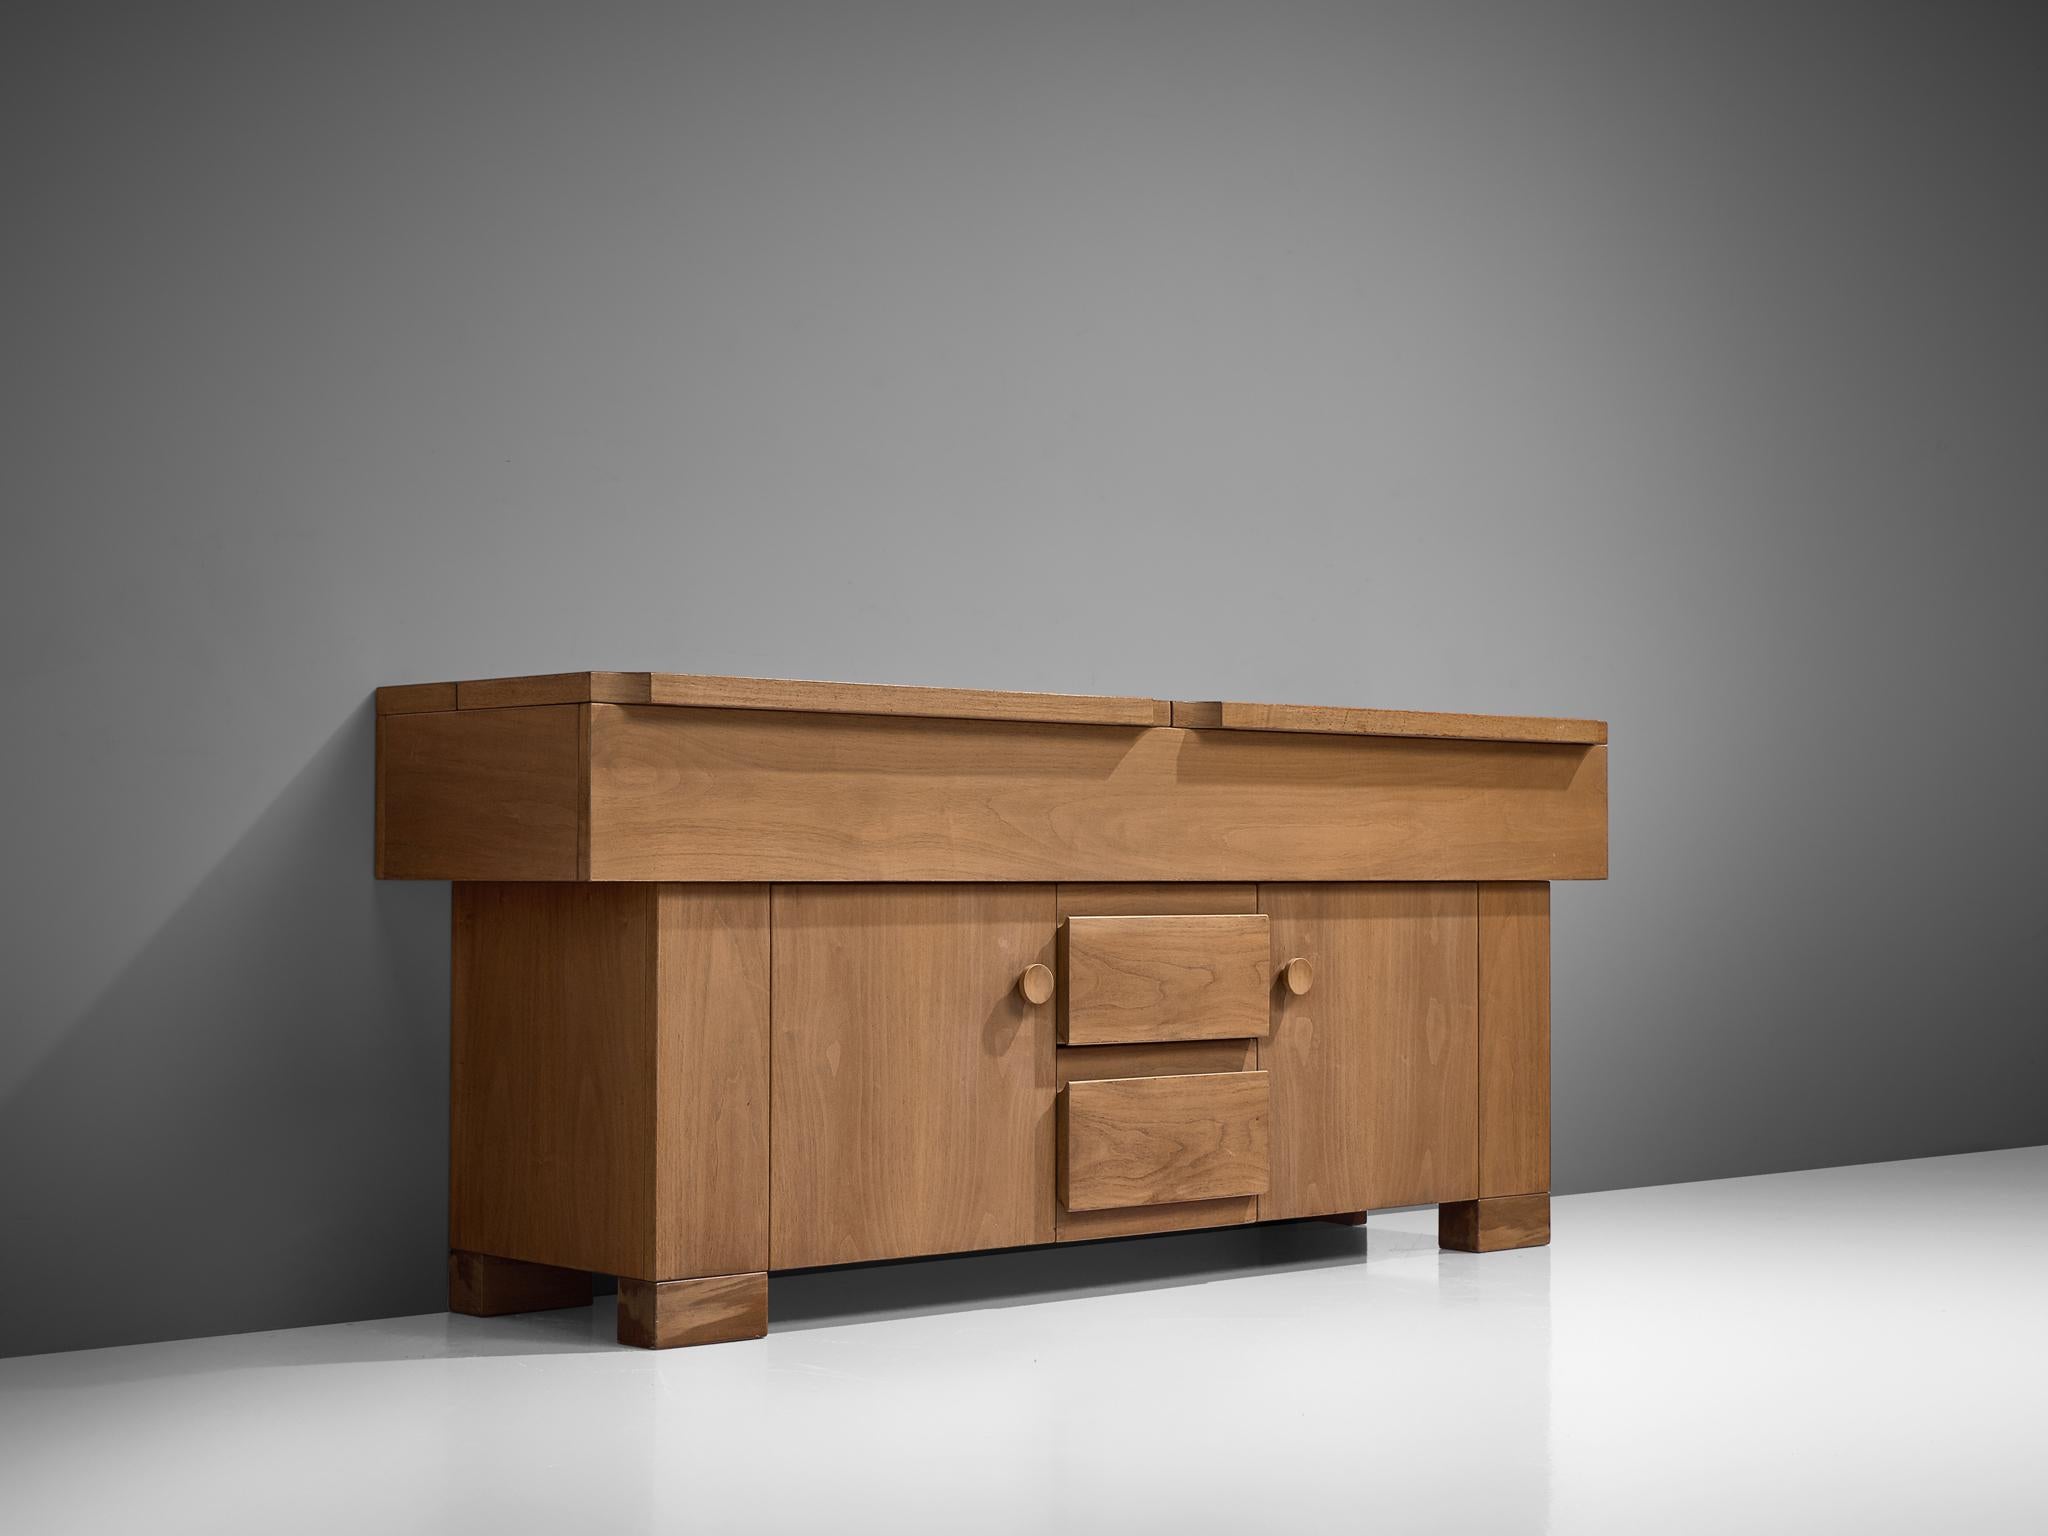 Giovanni Michelucci, sideboard, walnut Italy, 1964

This cabinet will brighten up your interior through its solid and grand appearance. It is a stunning cabinet in beautiful teak. The horizontal and vertical lines give it an architectural